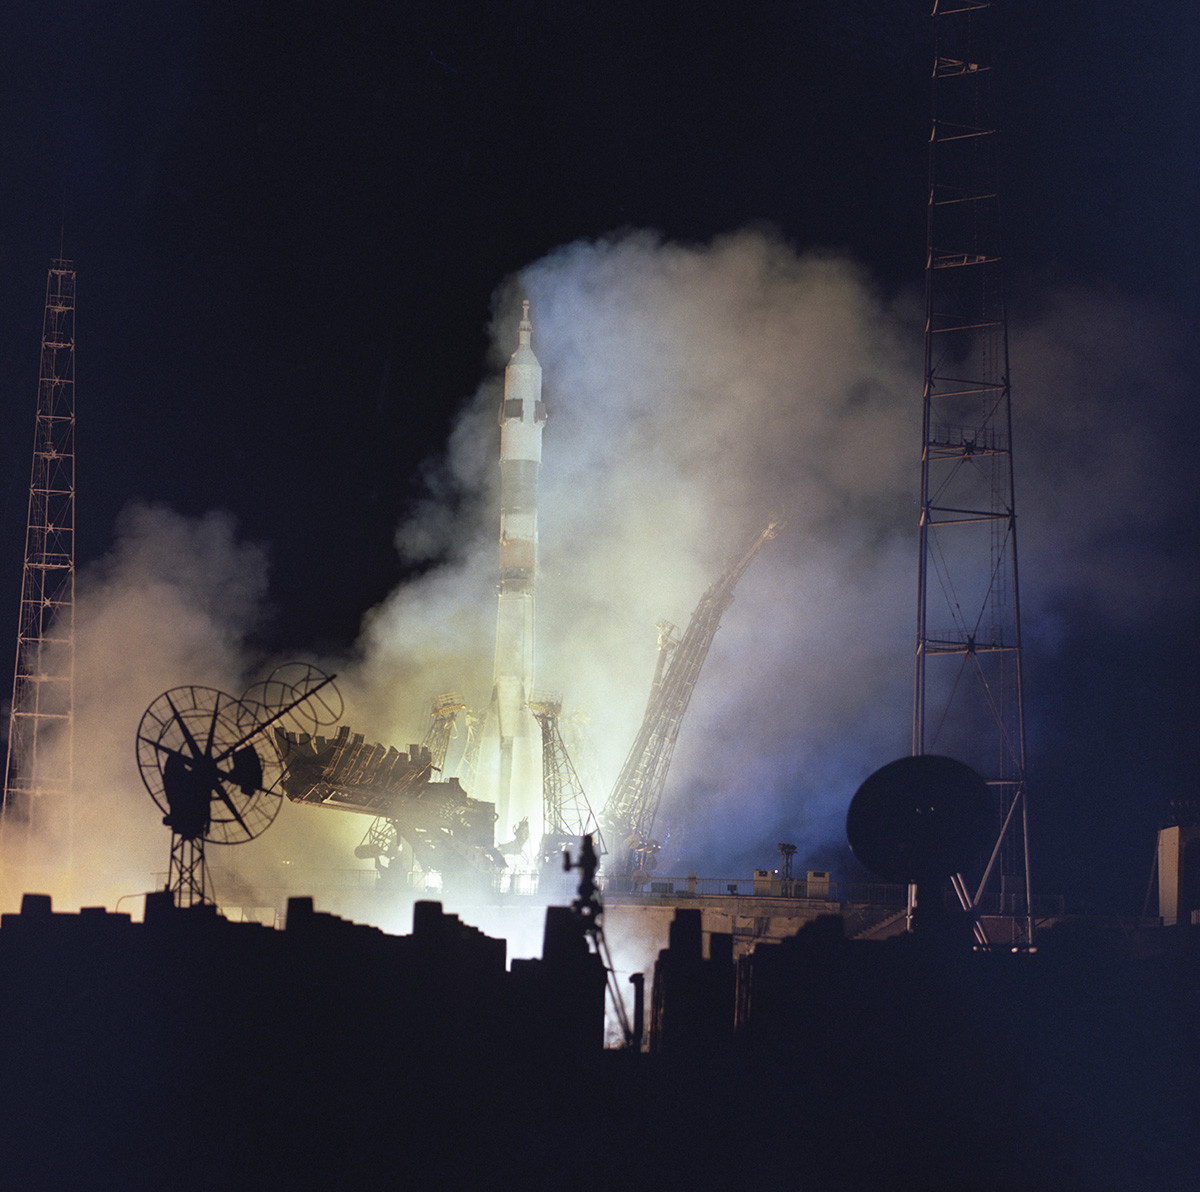 October 14, 1976. A night launch of the carrier rocket with the Soyuz-23 spacecraft at the Baikonur cosmodrome